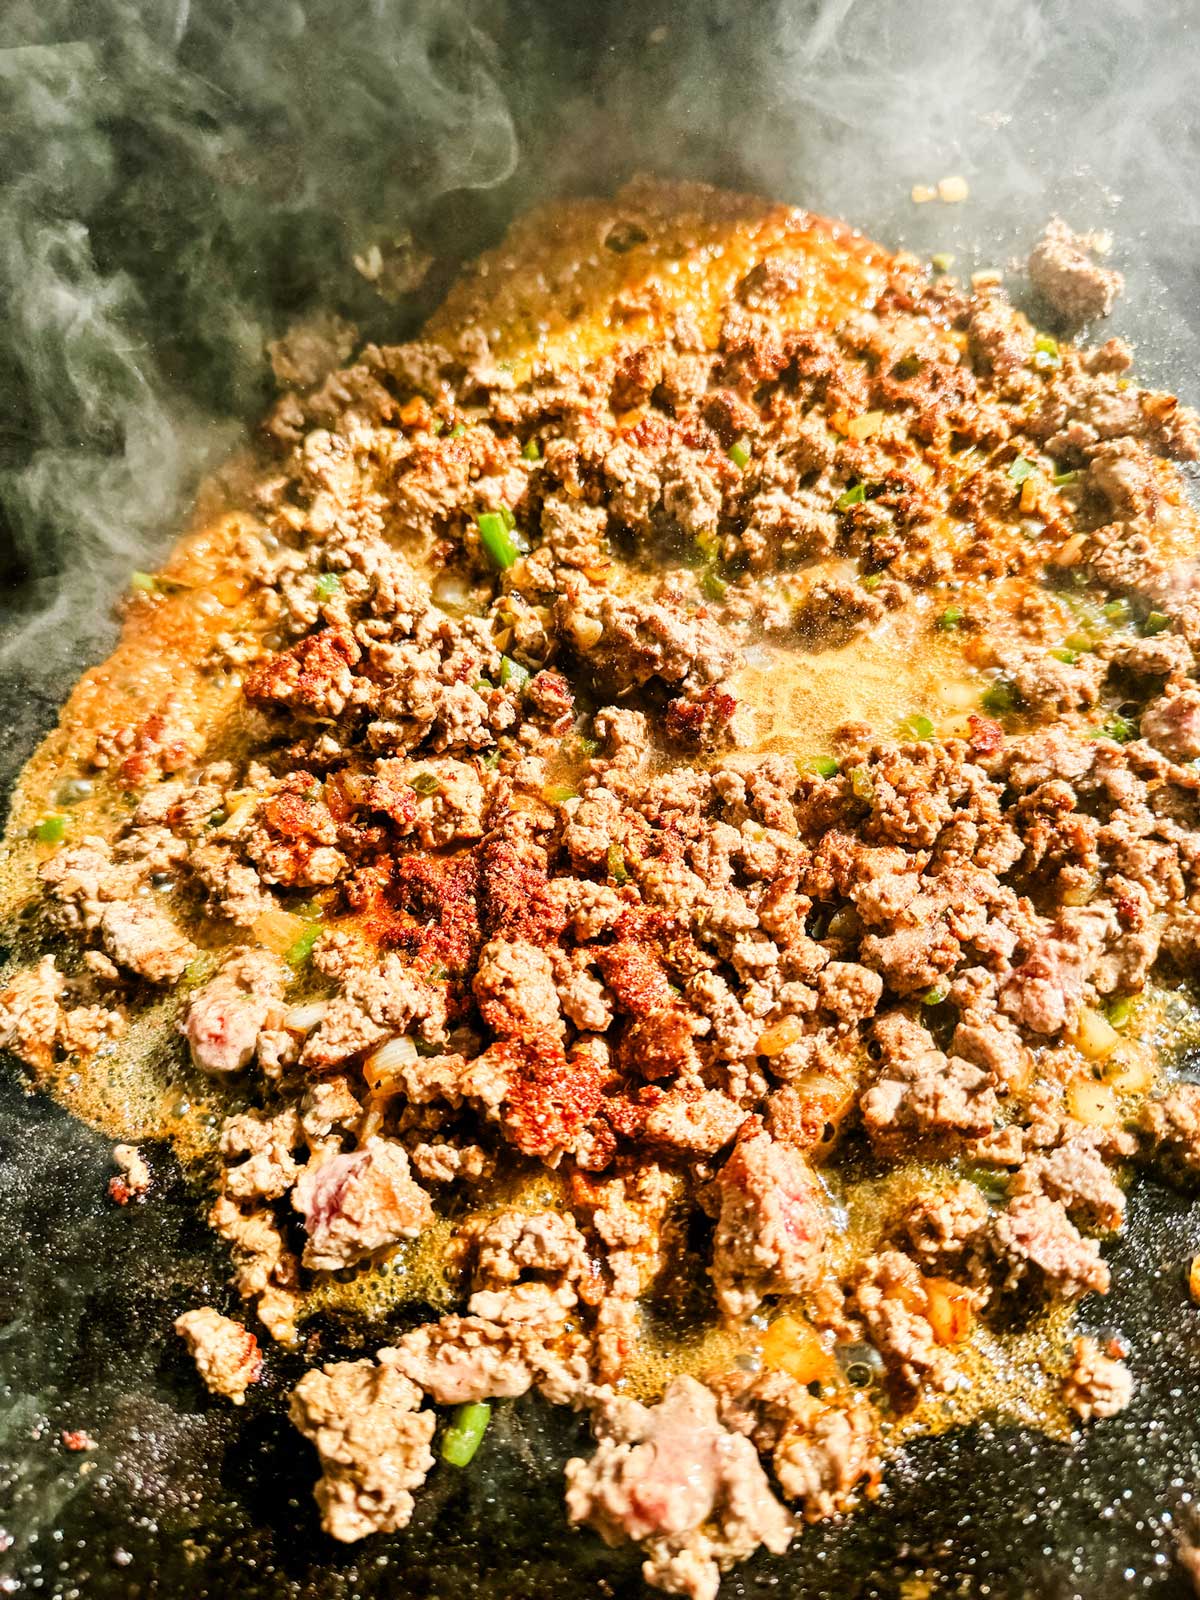 Water being added to ground beef to make saucy taco seasoned meat.